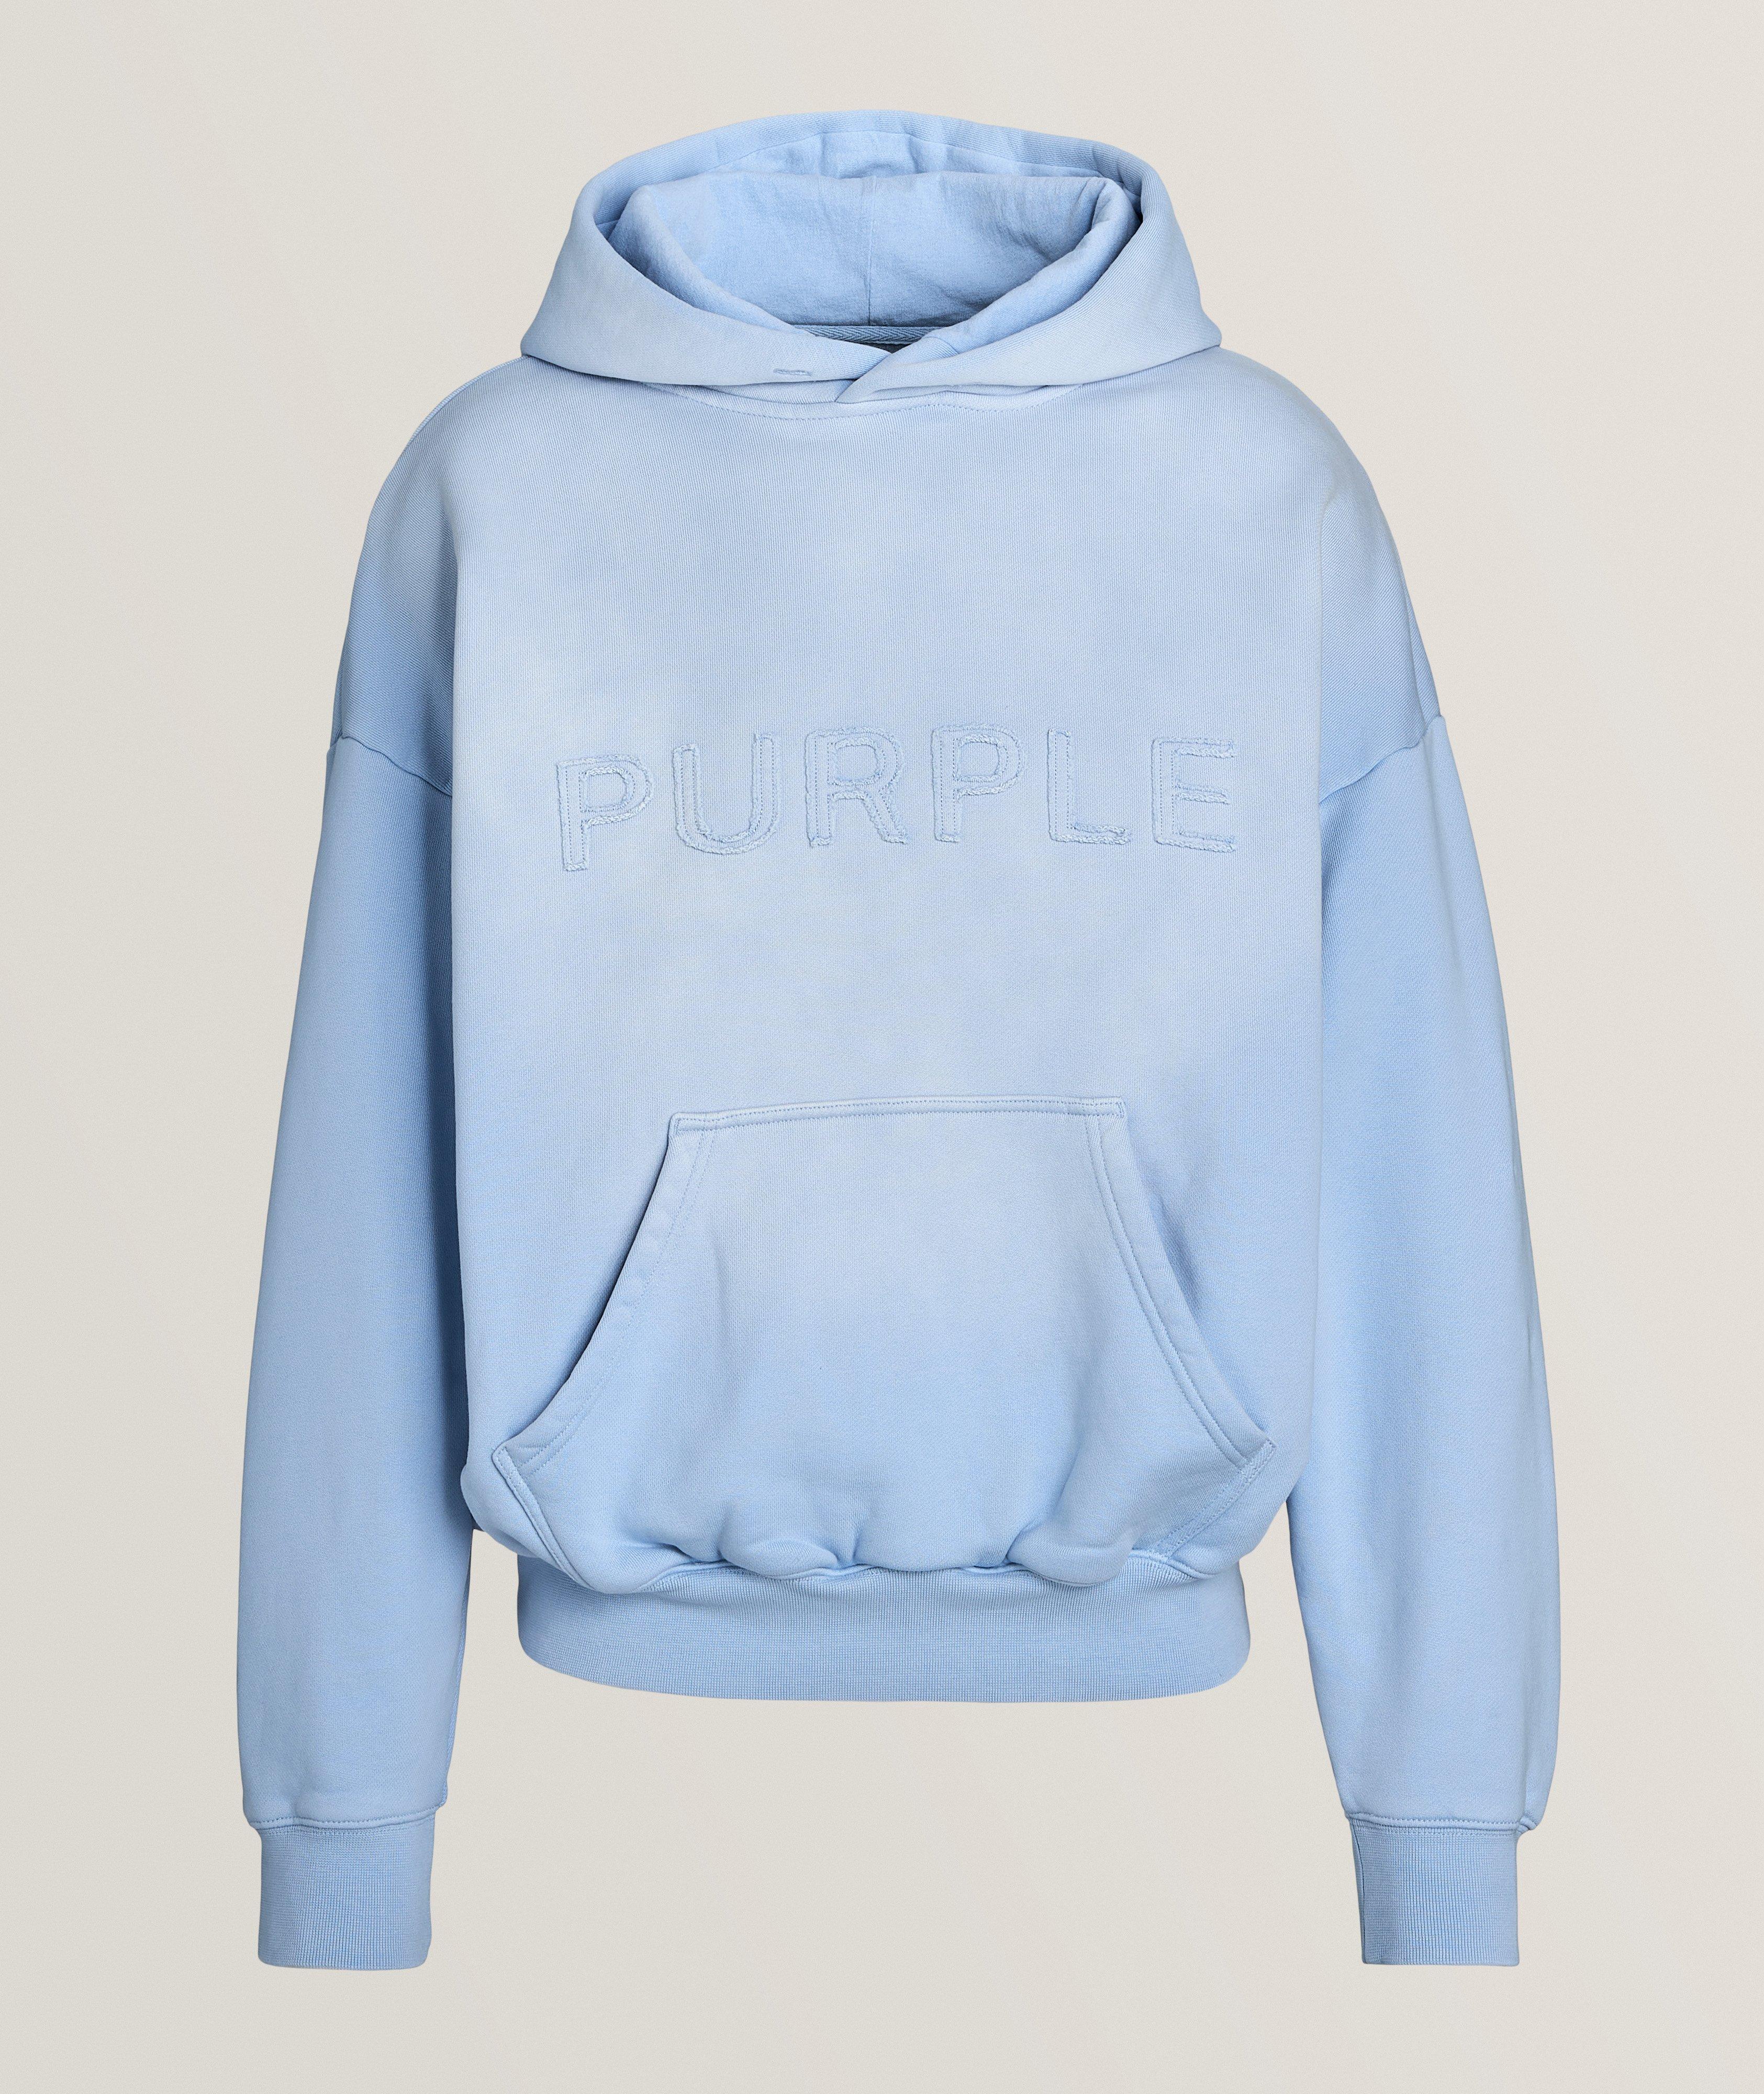 Distressed Logo Cotton Hooded Sweater image 0